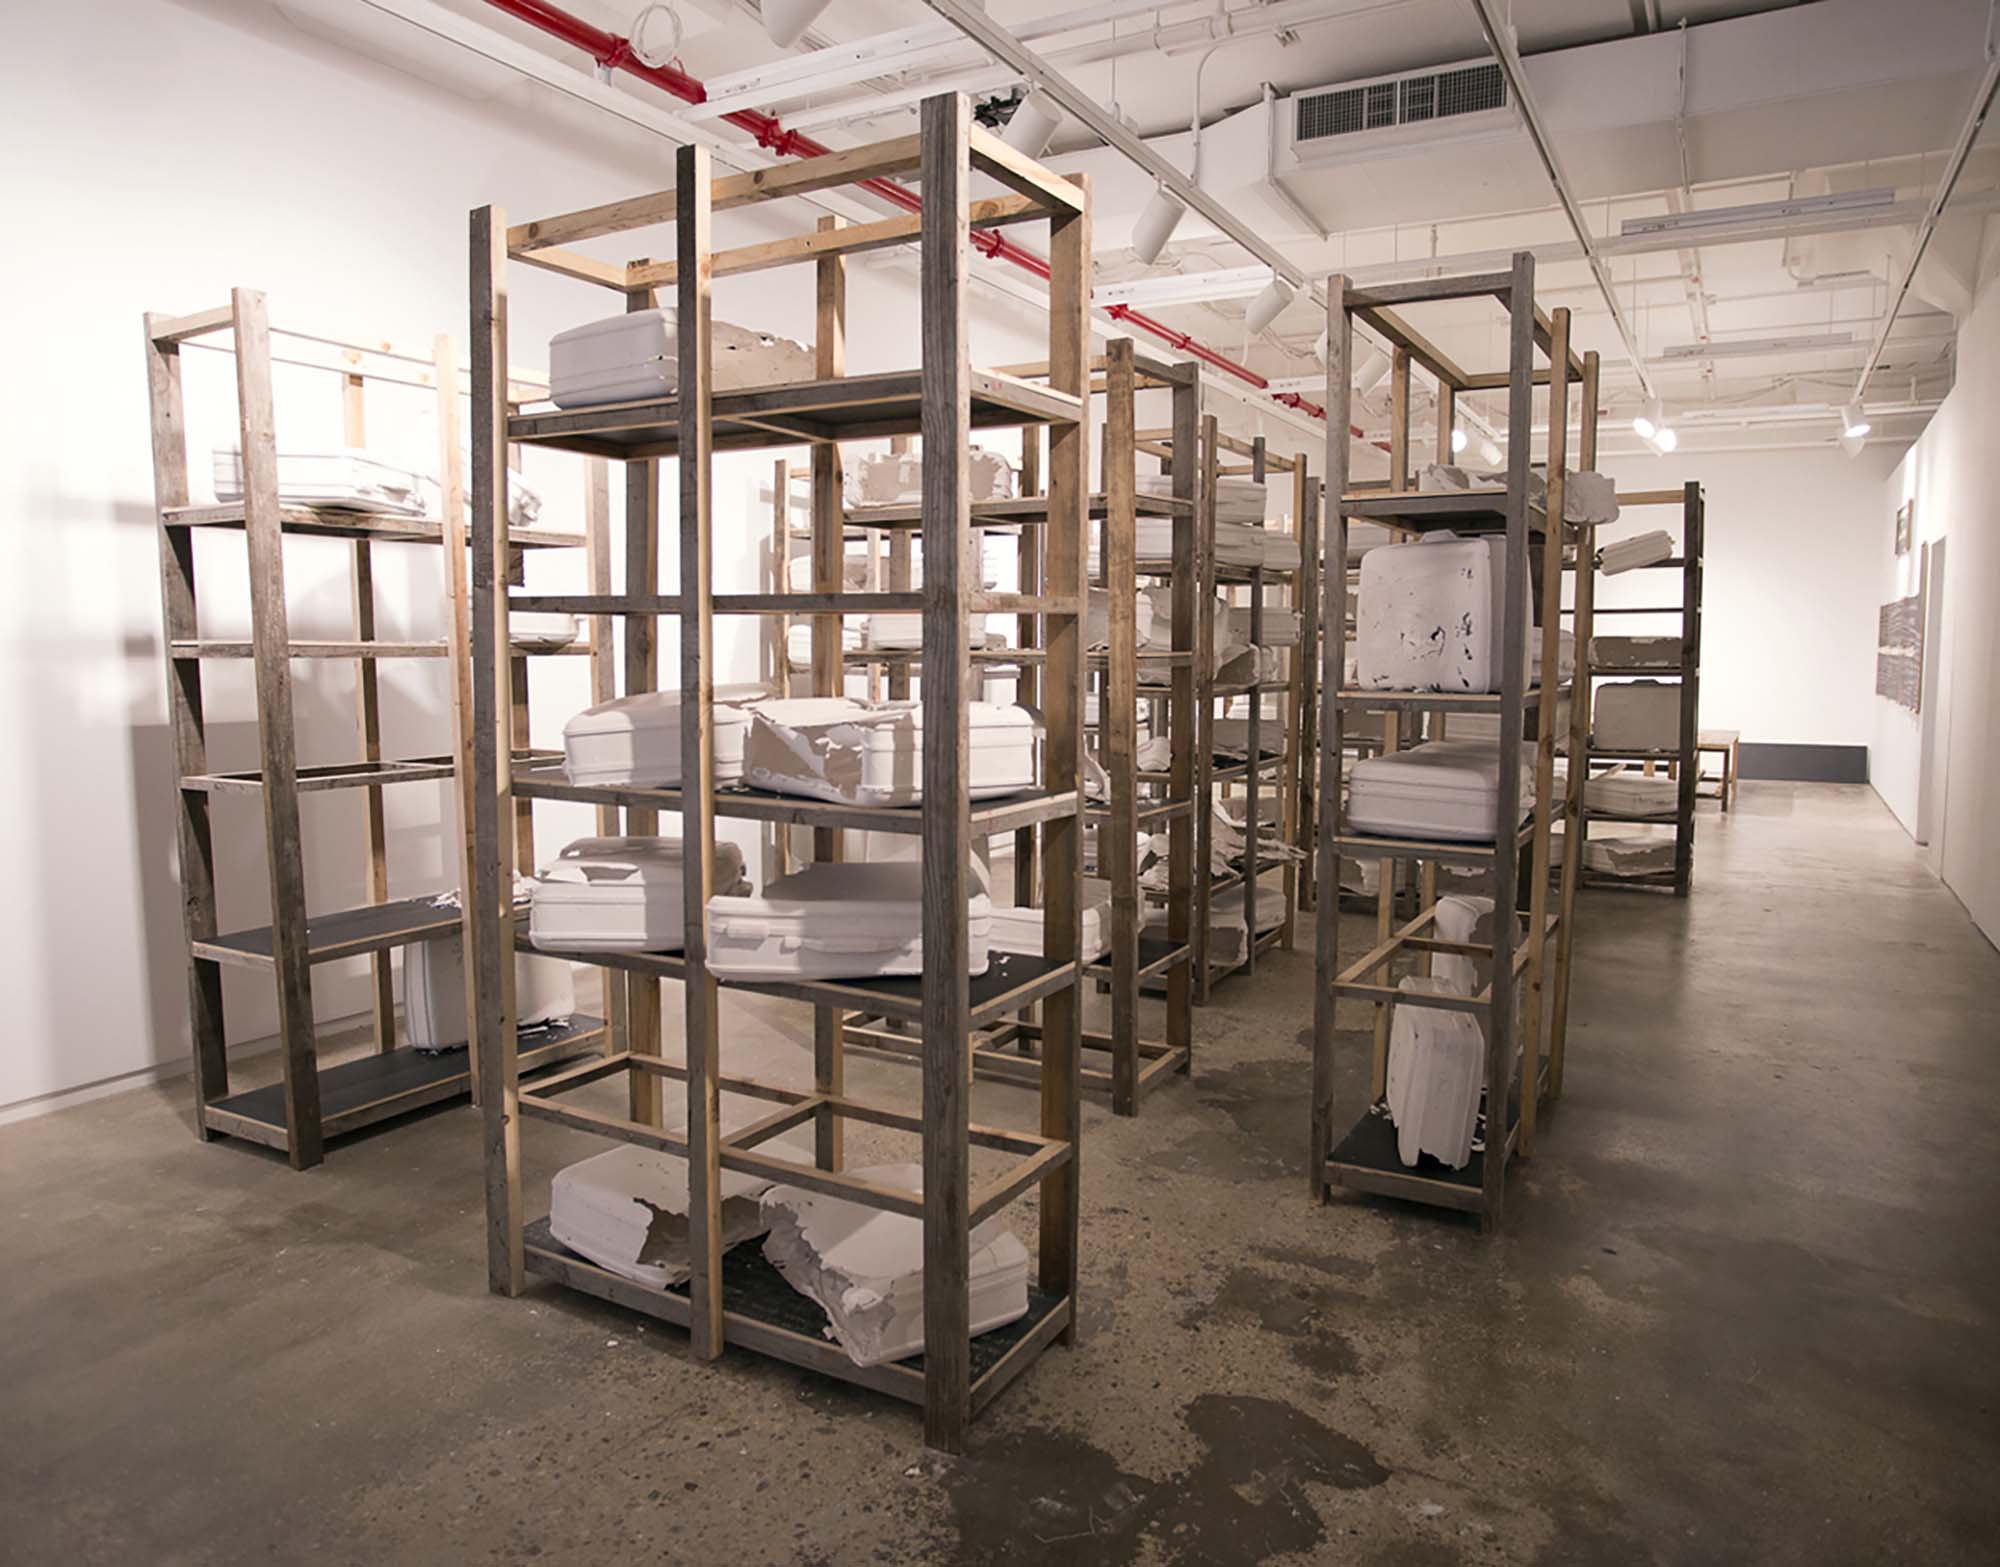 Wooden racks in a gallery space with white casts of suitcases